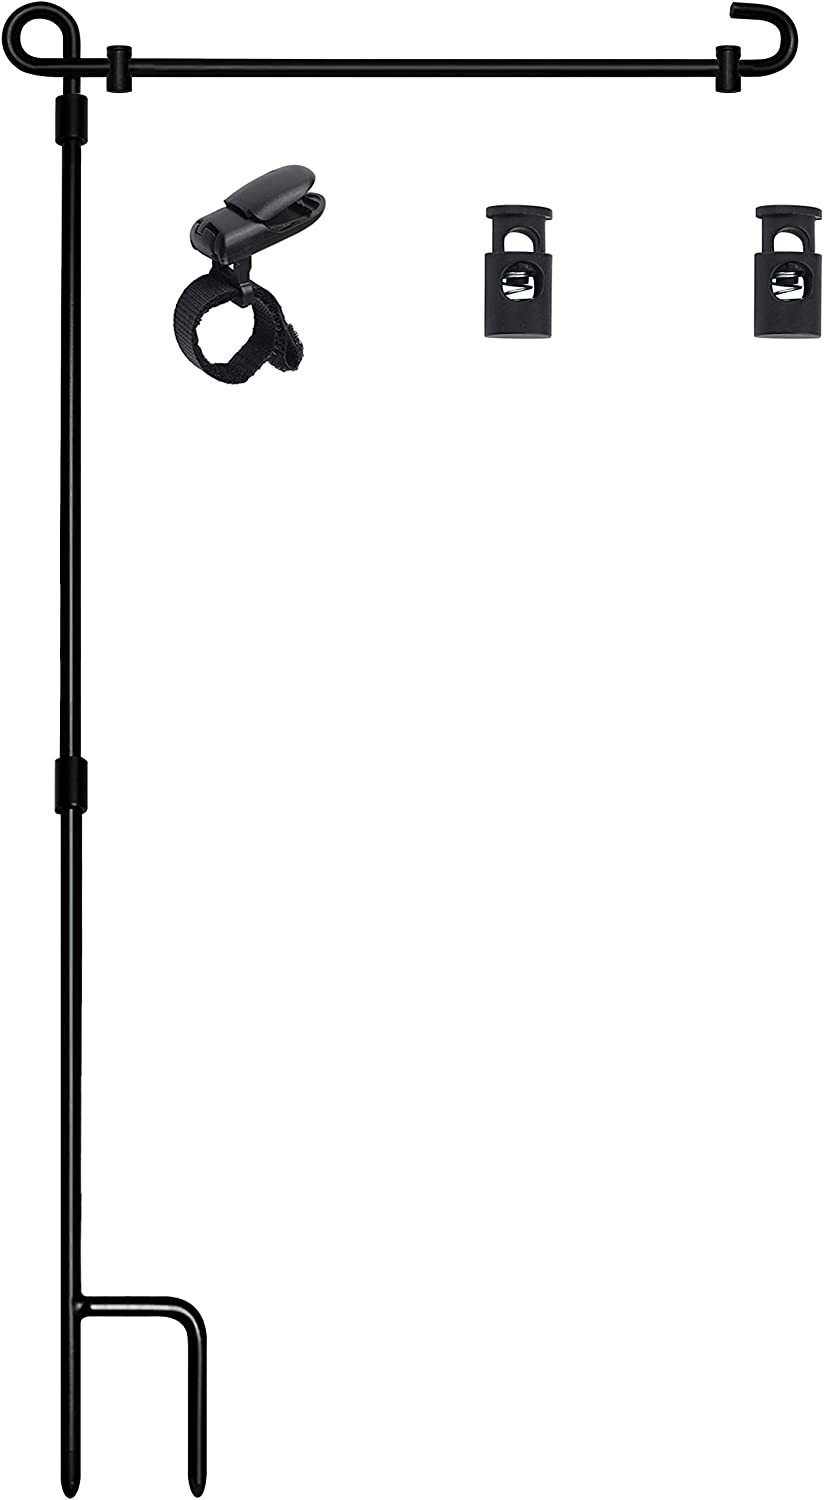 Shmabda Garden Flag Stand, Premium Garden Flag Pole Holder Metal Wrought Iron Powder-Coated Weather-Proof Paint with Tiger Clip and Spring Stoppers